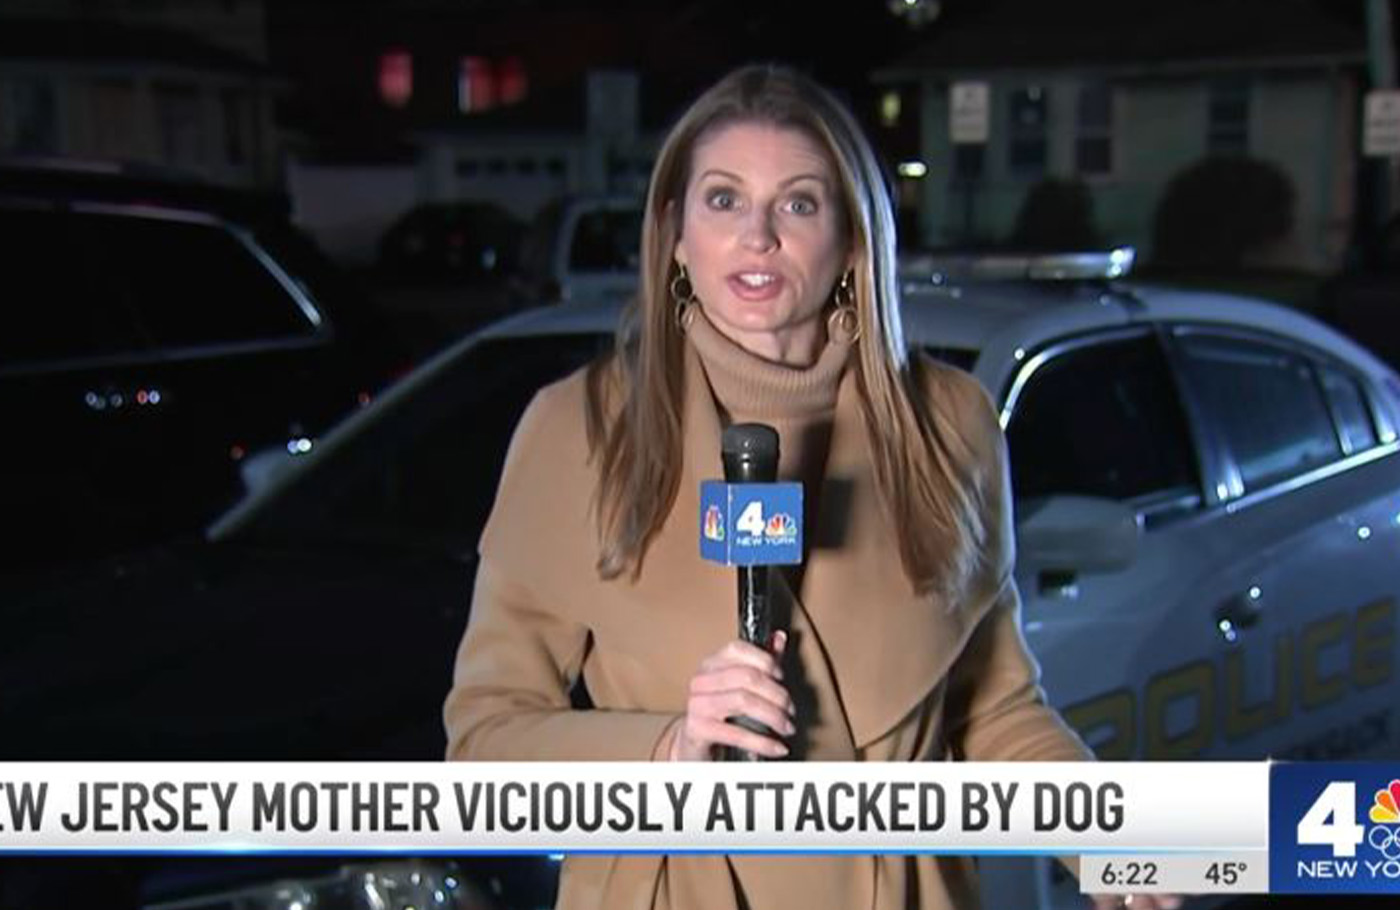 NJ mom hoping to keep fingers after dog attack